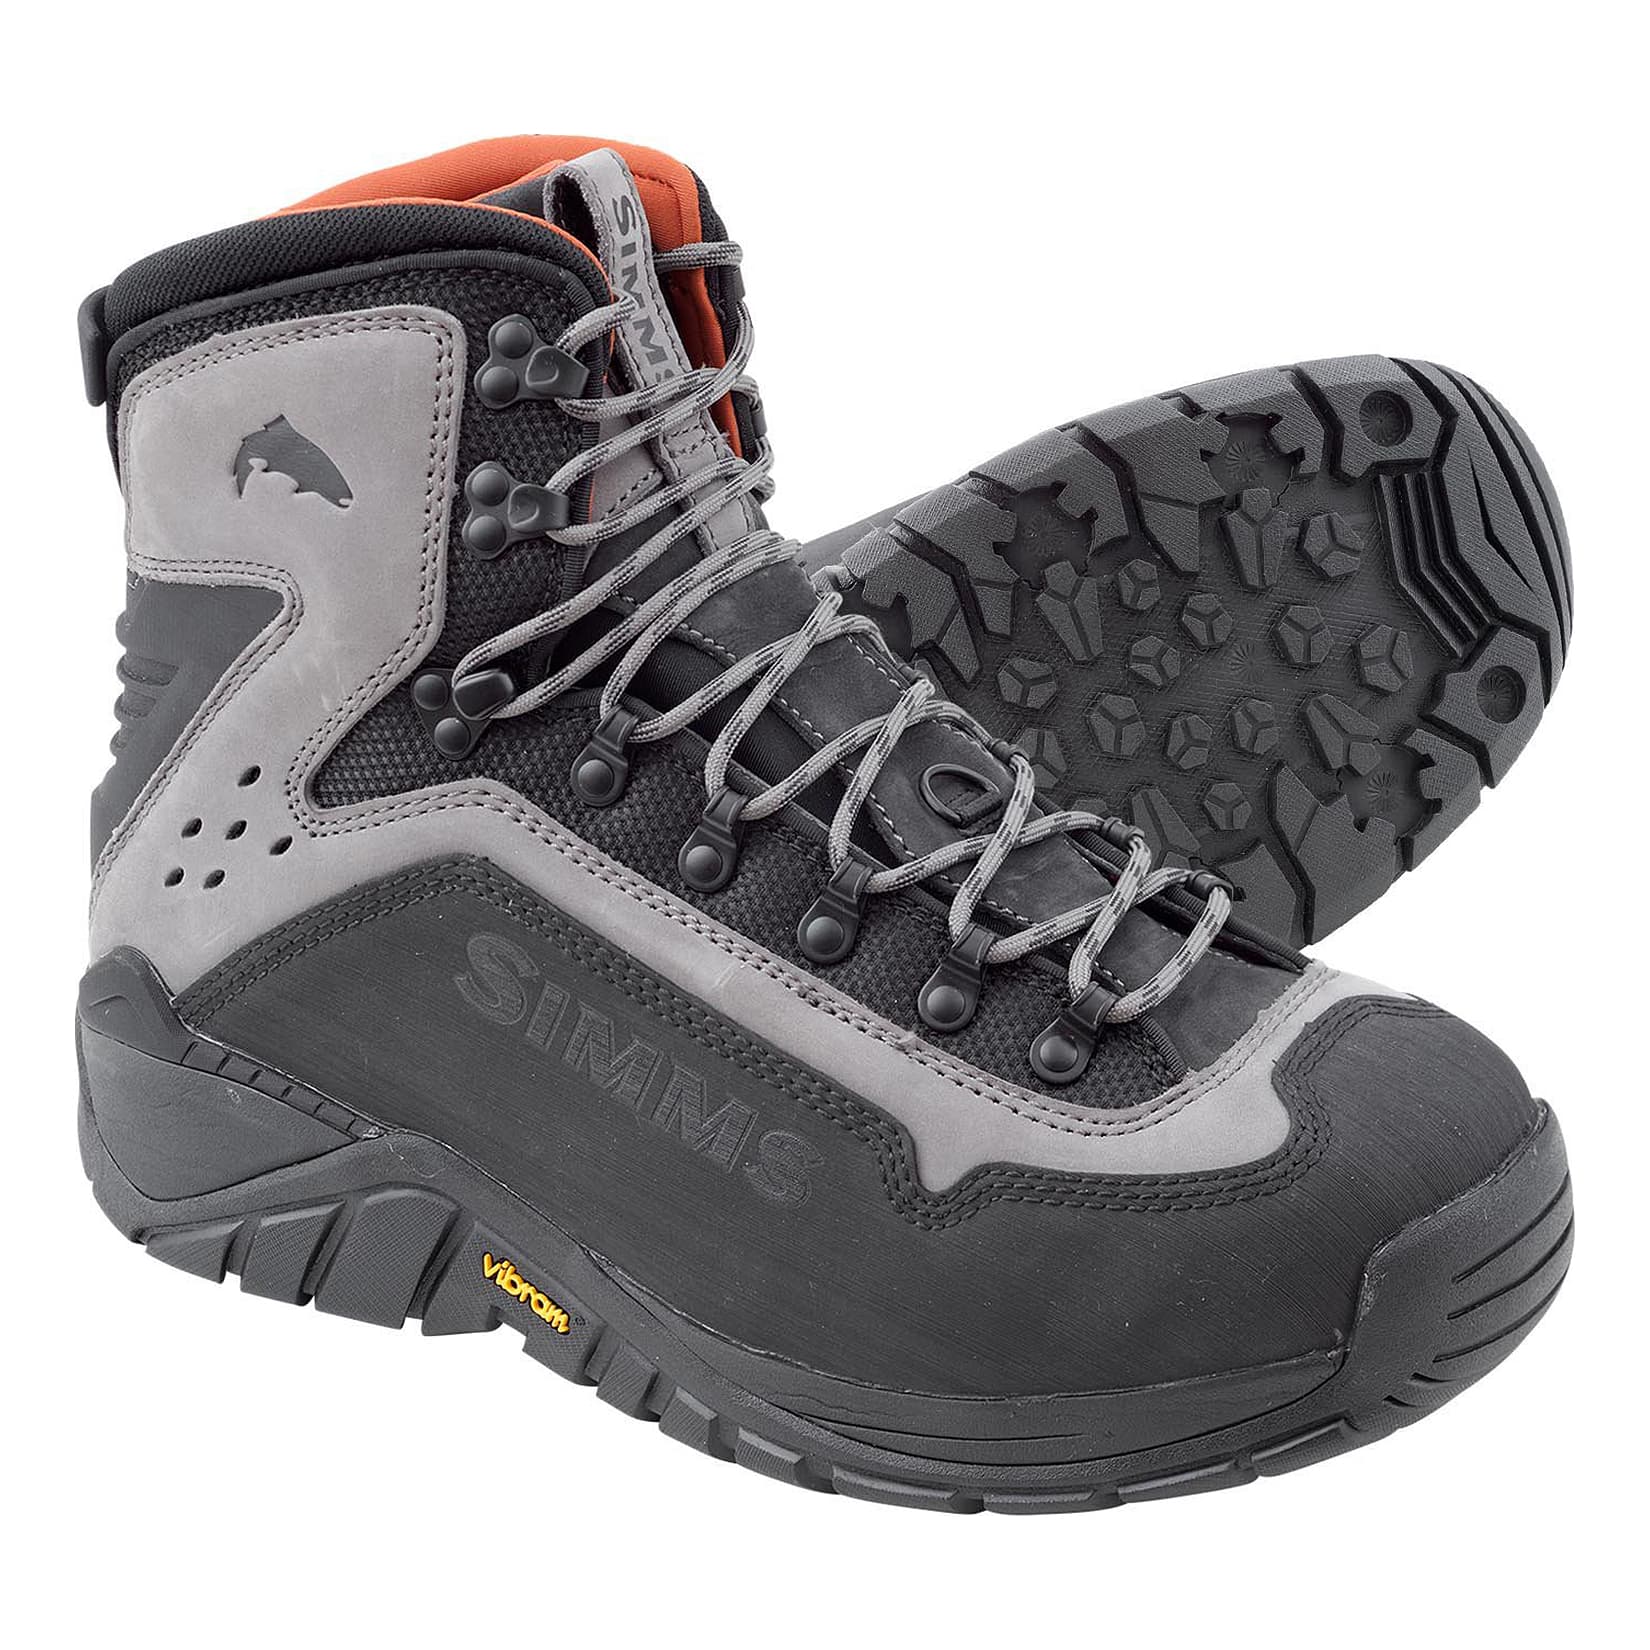 Simms® G3 Guide™ Rubber Sole Wading Boot